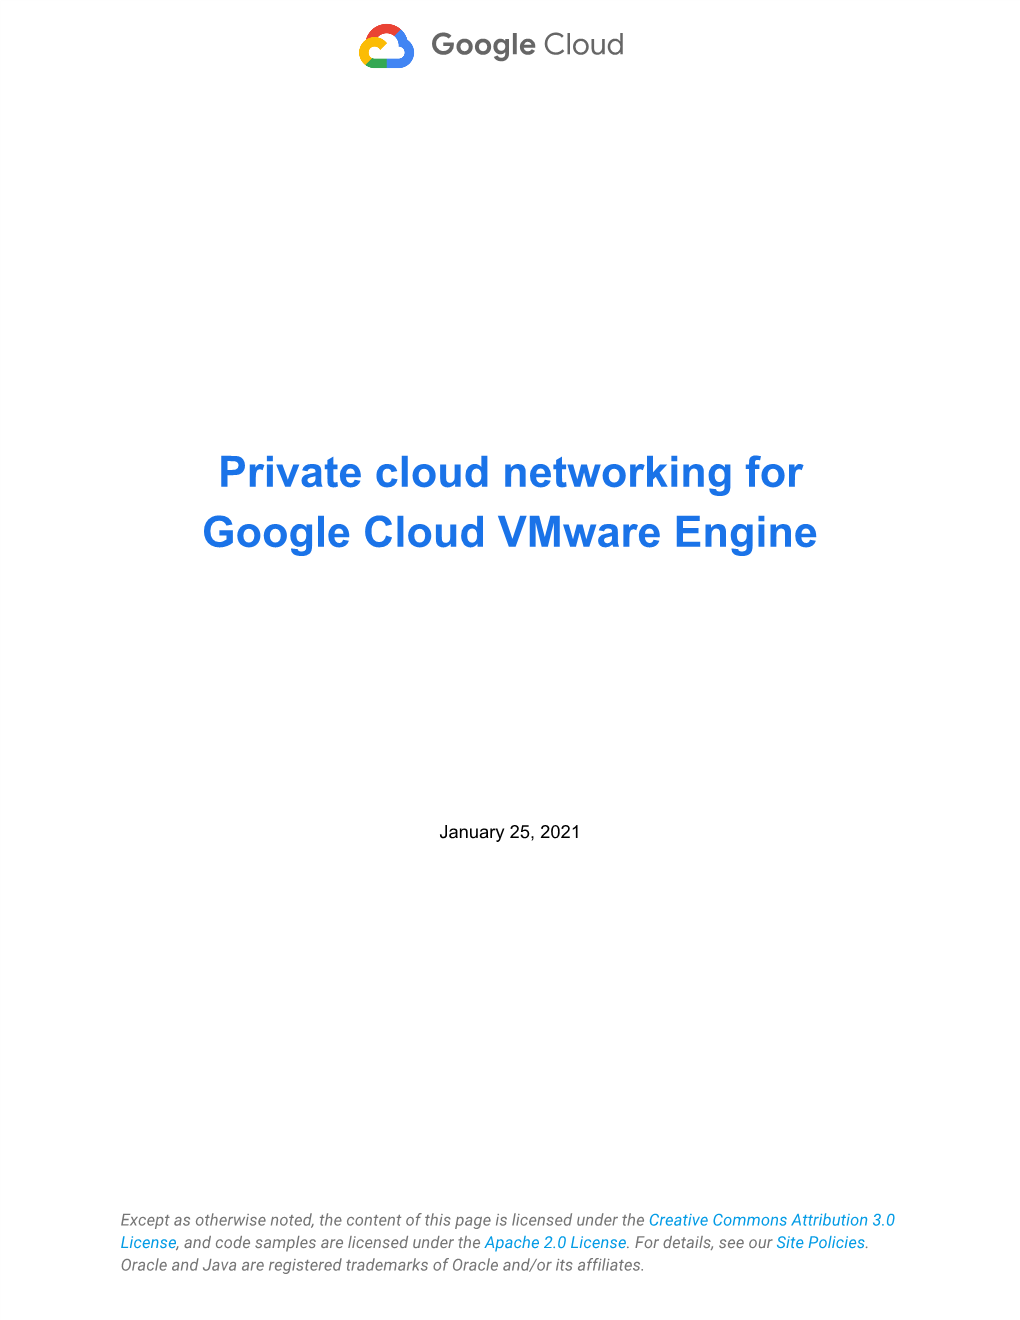 Private Cloud Networking for Google Cloud Vmware Engine